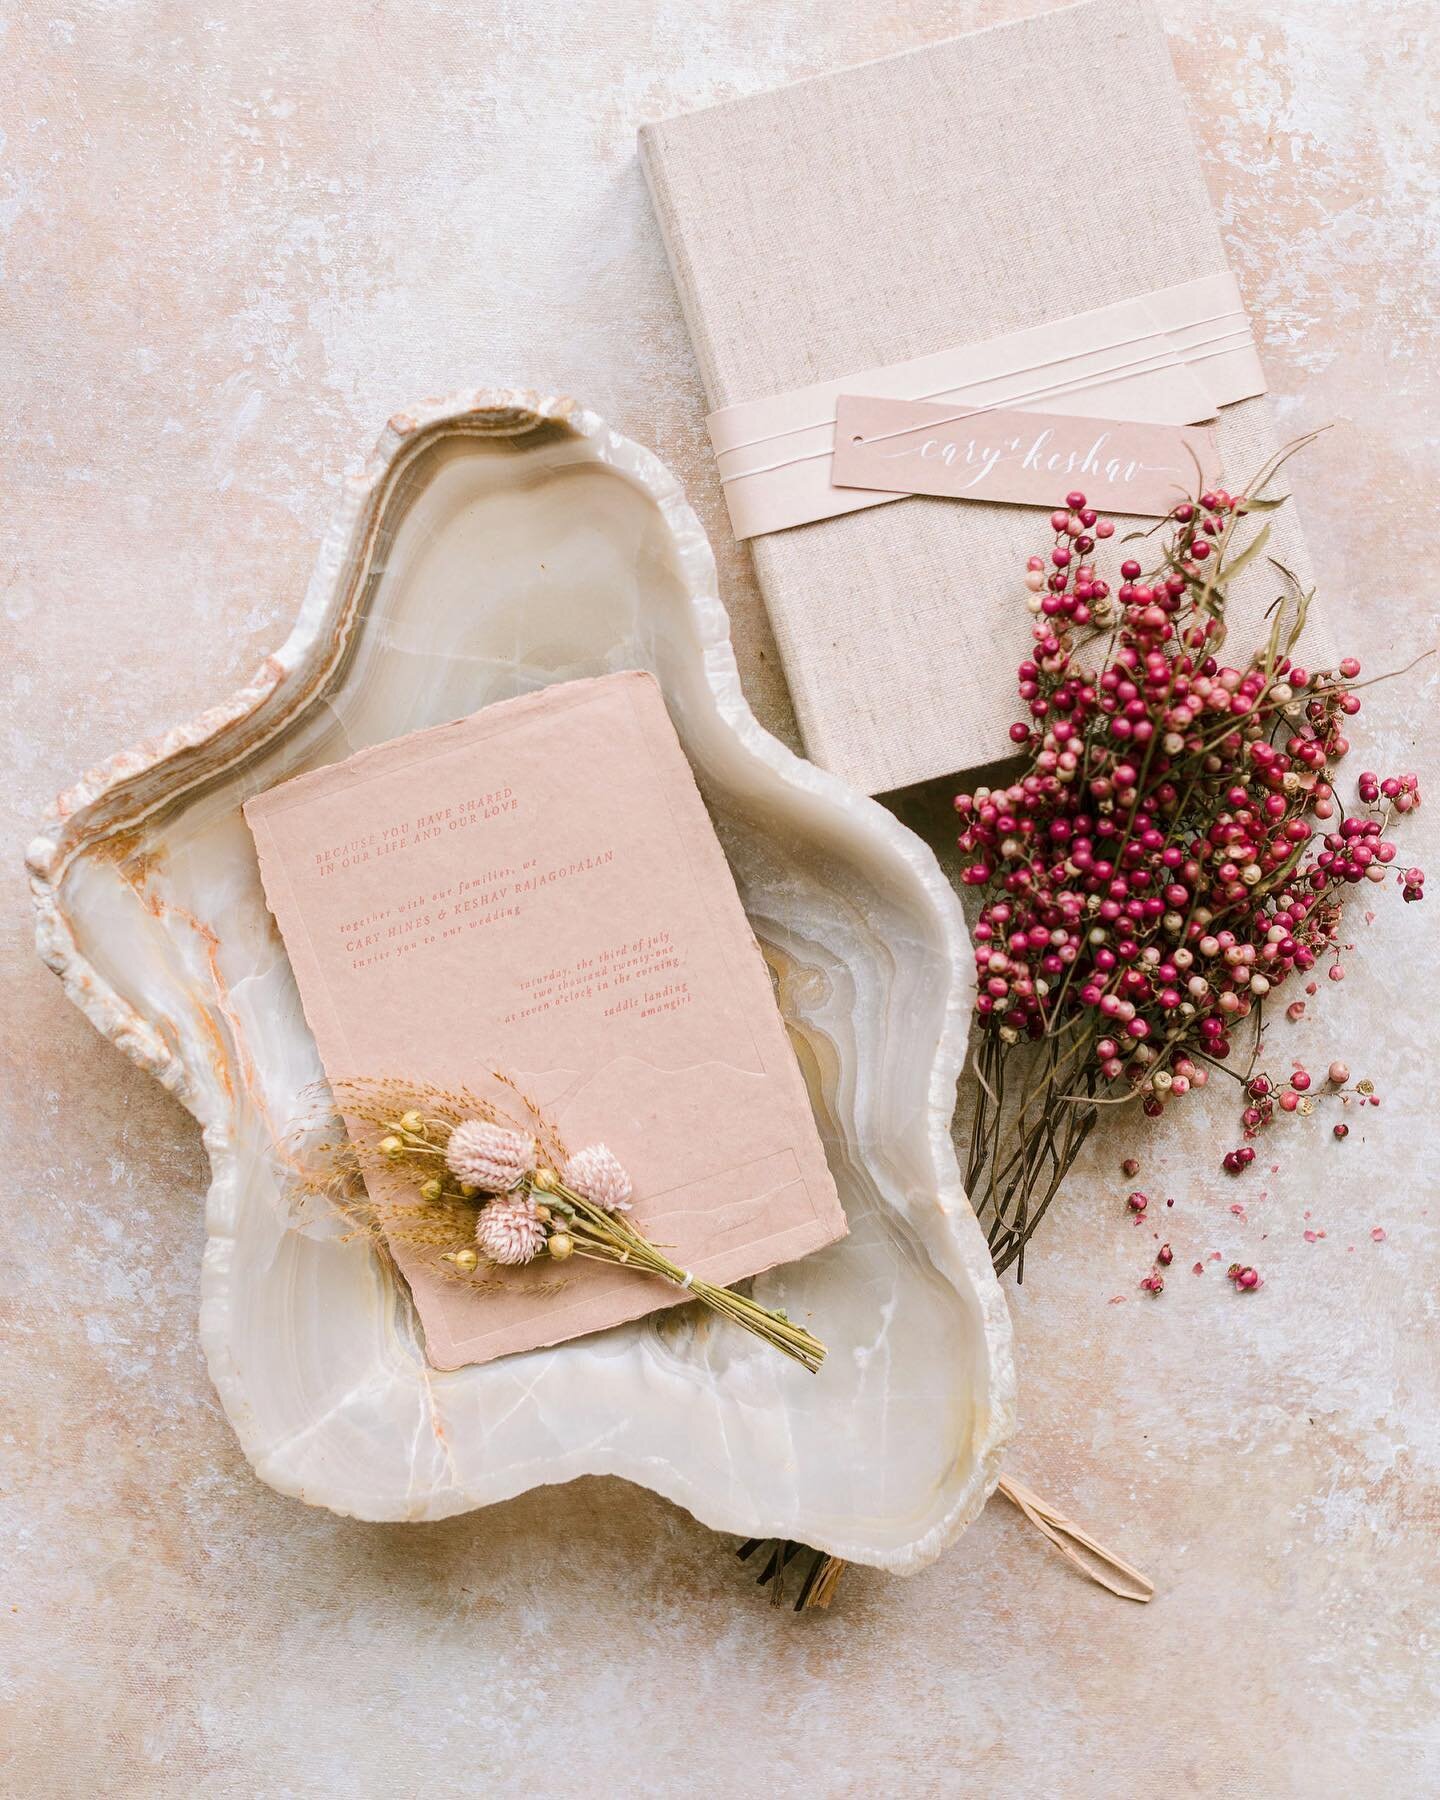 Instead of mailing out invitations beforehand, C&amp;K opted for boxed invites left as a turndown gift in guest rooms then night before their wedding day. Each box featured a floral arrangement, letterpress invitation, and their favorite photos with 